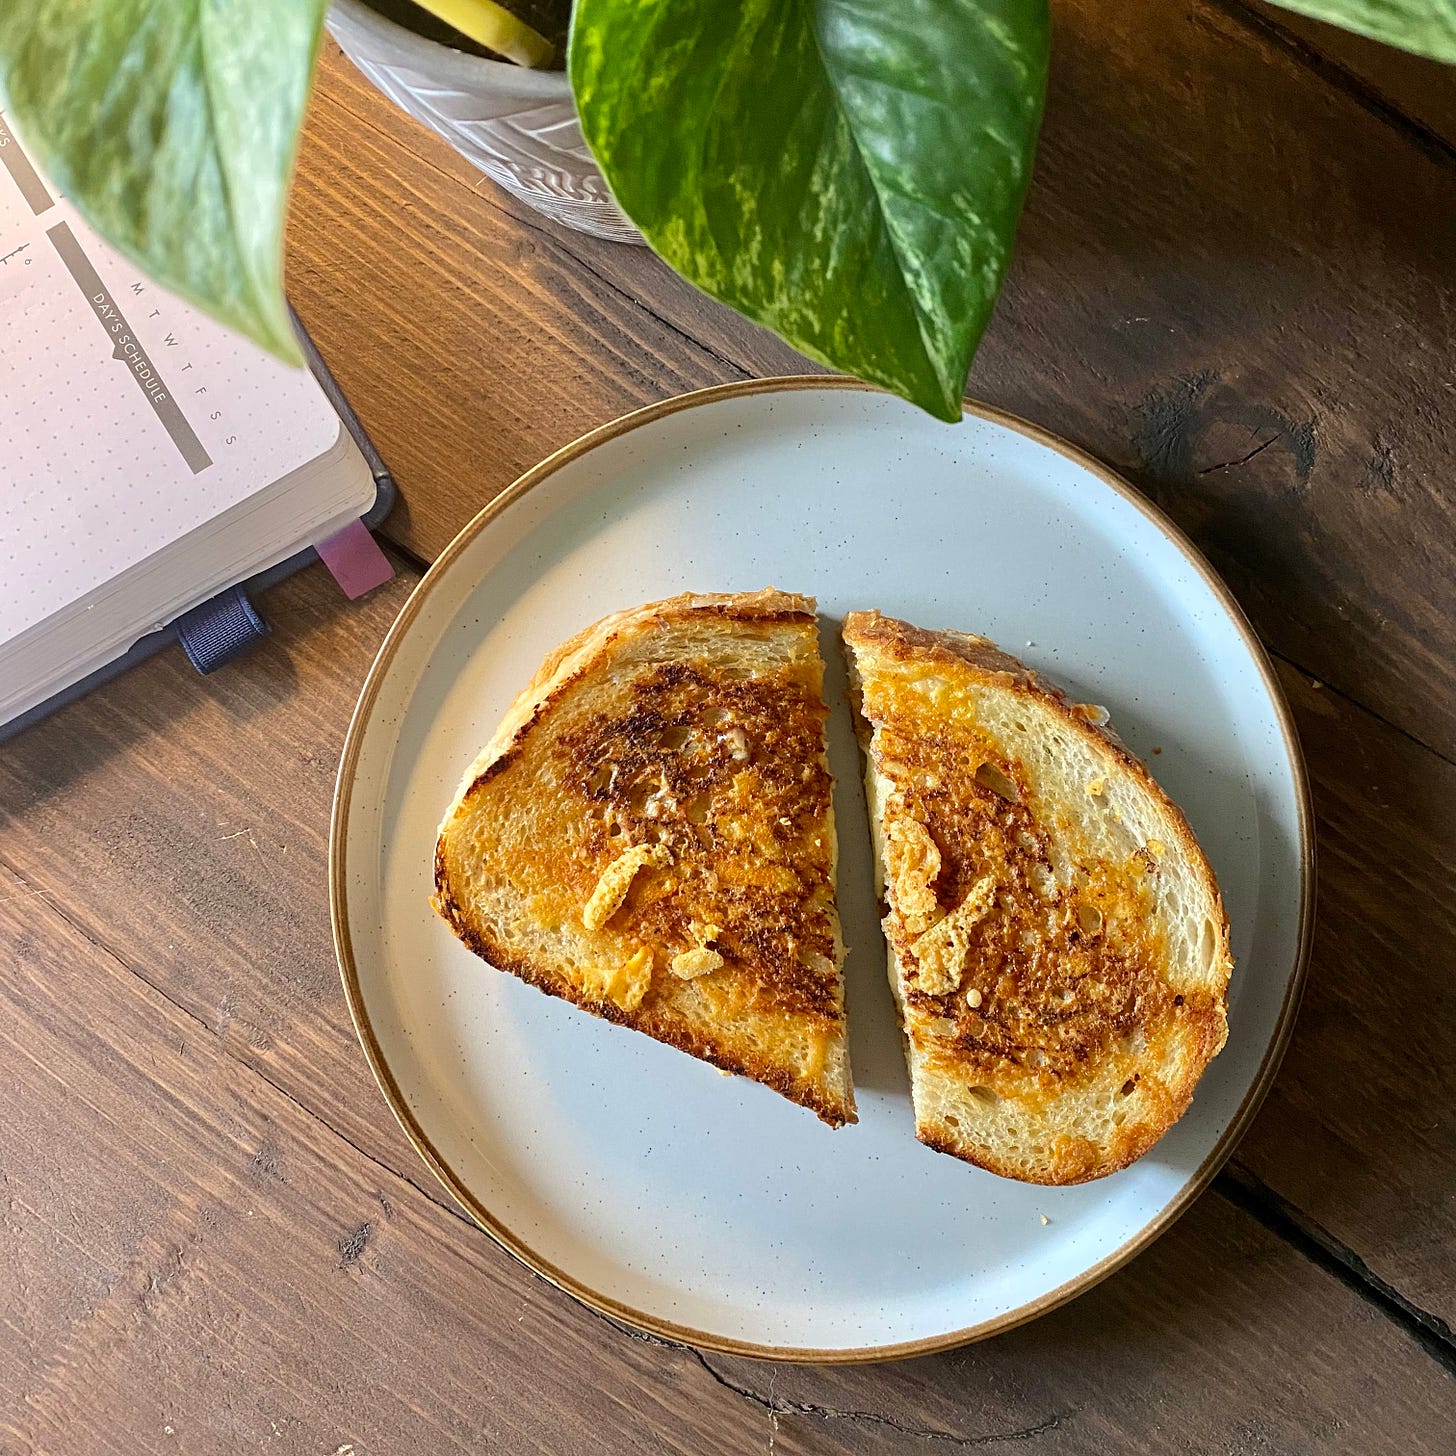 Toasted cheese sandwich on a plate on a wooden desk, a plant and planner in view top left